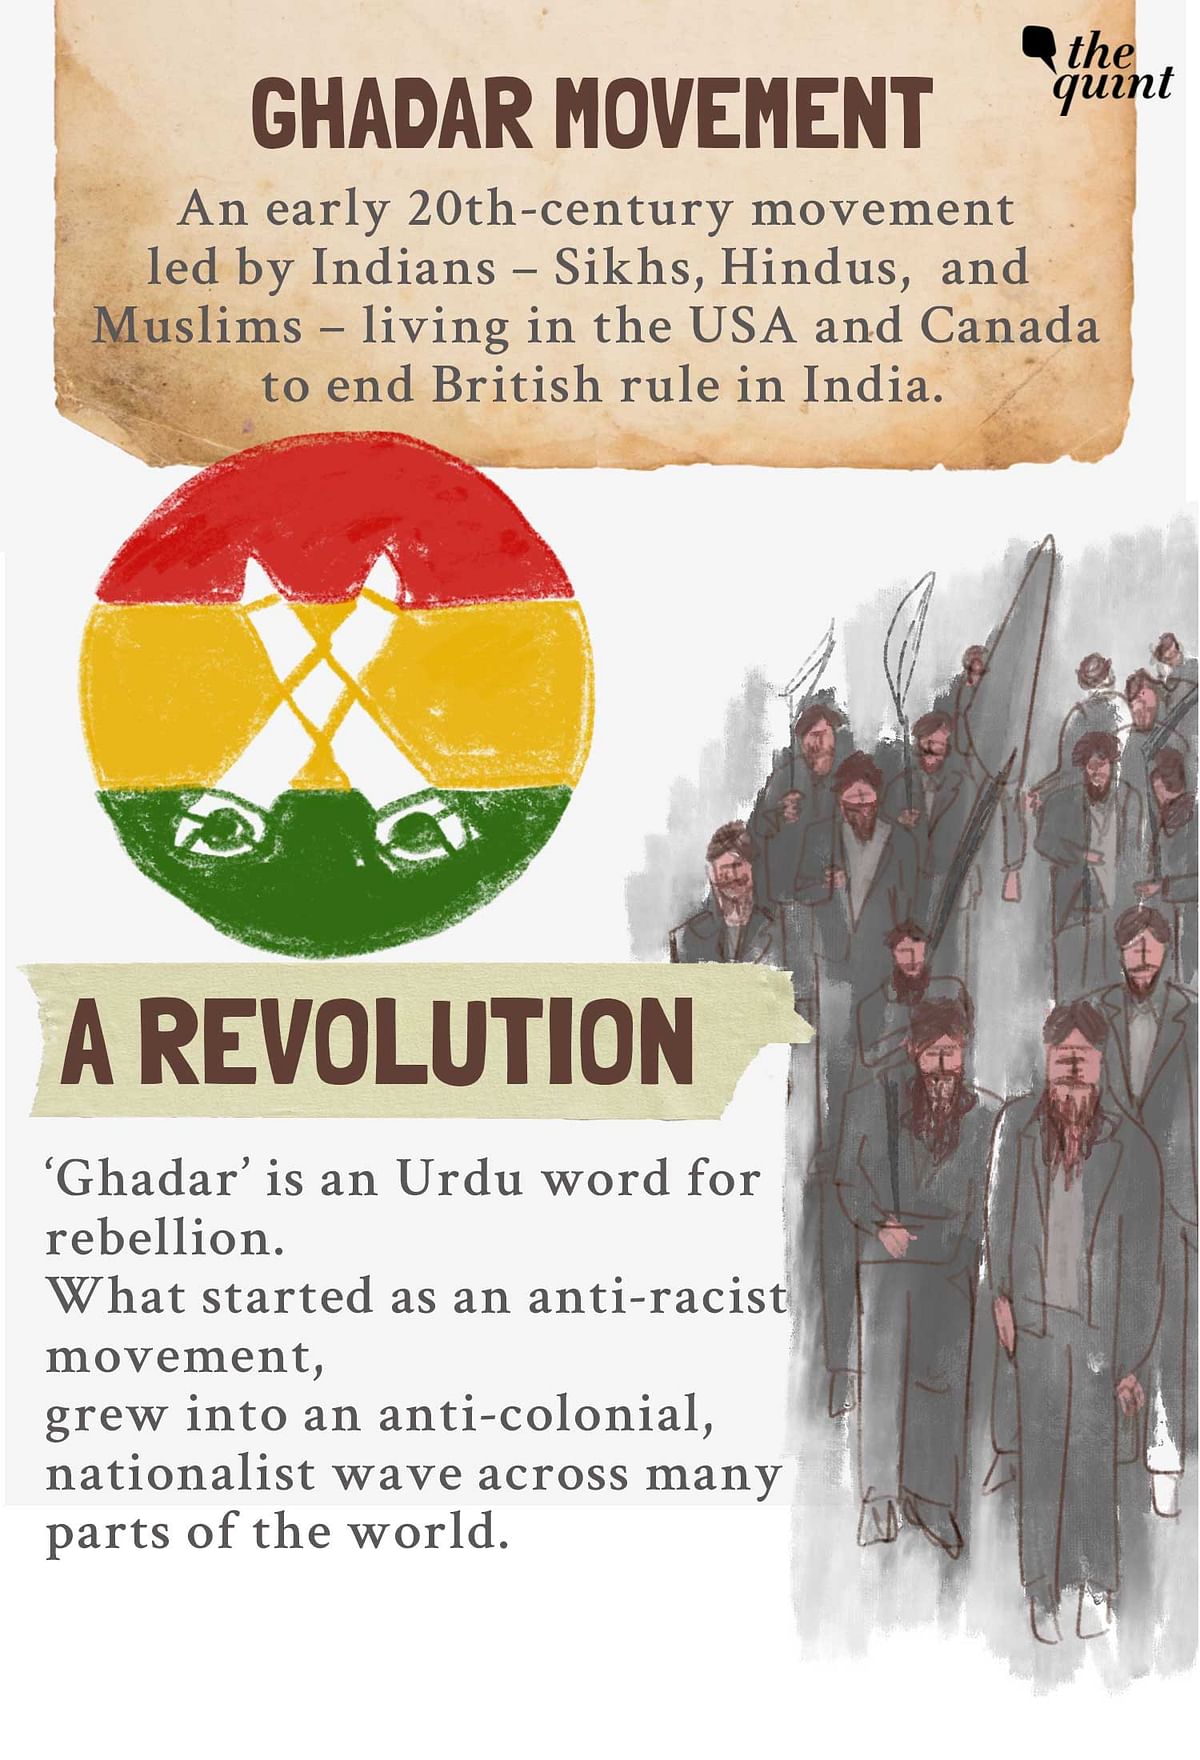 British tried all means – banned peaceful protests, passed draconian laws. But nothing could stop the Ghadar mutiny.